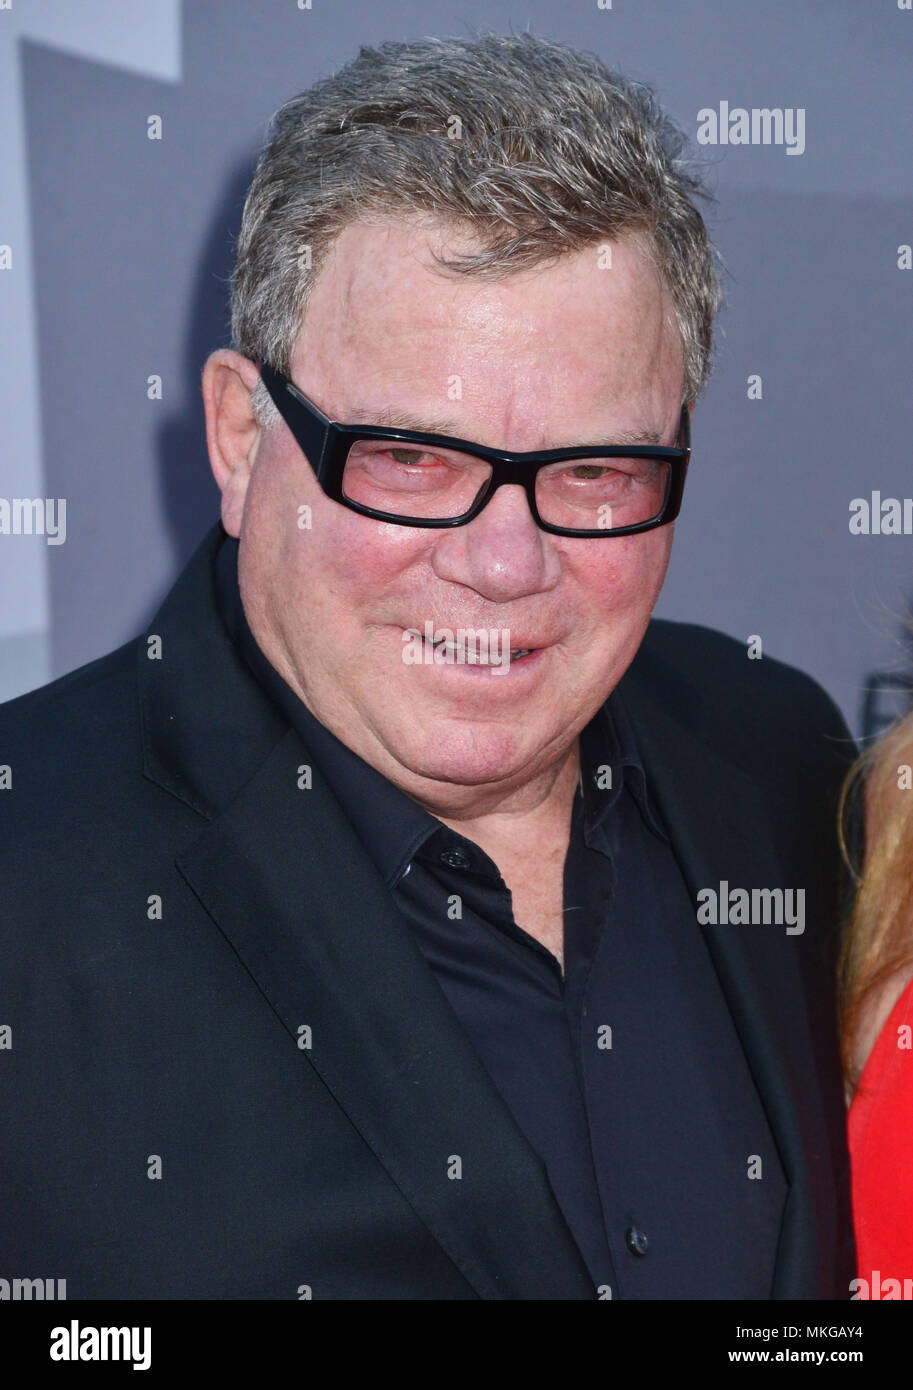 William Shatner 056.jpg at the LA PhilharmonicÕs Walt Disney Concert Hall Opening Night Concert and Gala at the Disney Hall in Los Angeles. September 29, 2015.a William Shatner 056  Event in Hollywood Life - California,  Red Carpet Event, Vertical, USA, Film Industry, Celebrities,  Photography, Bestof, Arts Culture and Entertainment, Topix Celebrities fashion / one person, Vertical, Best of, Hollywood Life, Event in Hollywood Life - California,  Red Carpet and backstage, USA, Film Industry, Celebrities,  movie celebrities, TV celebrities, Music celebrities, Photography, Bestof, Arts Culture an Stock Photo